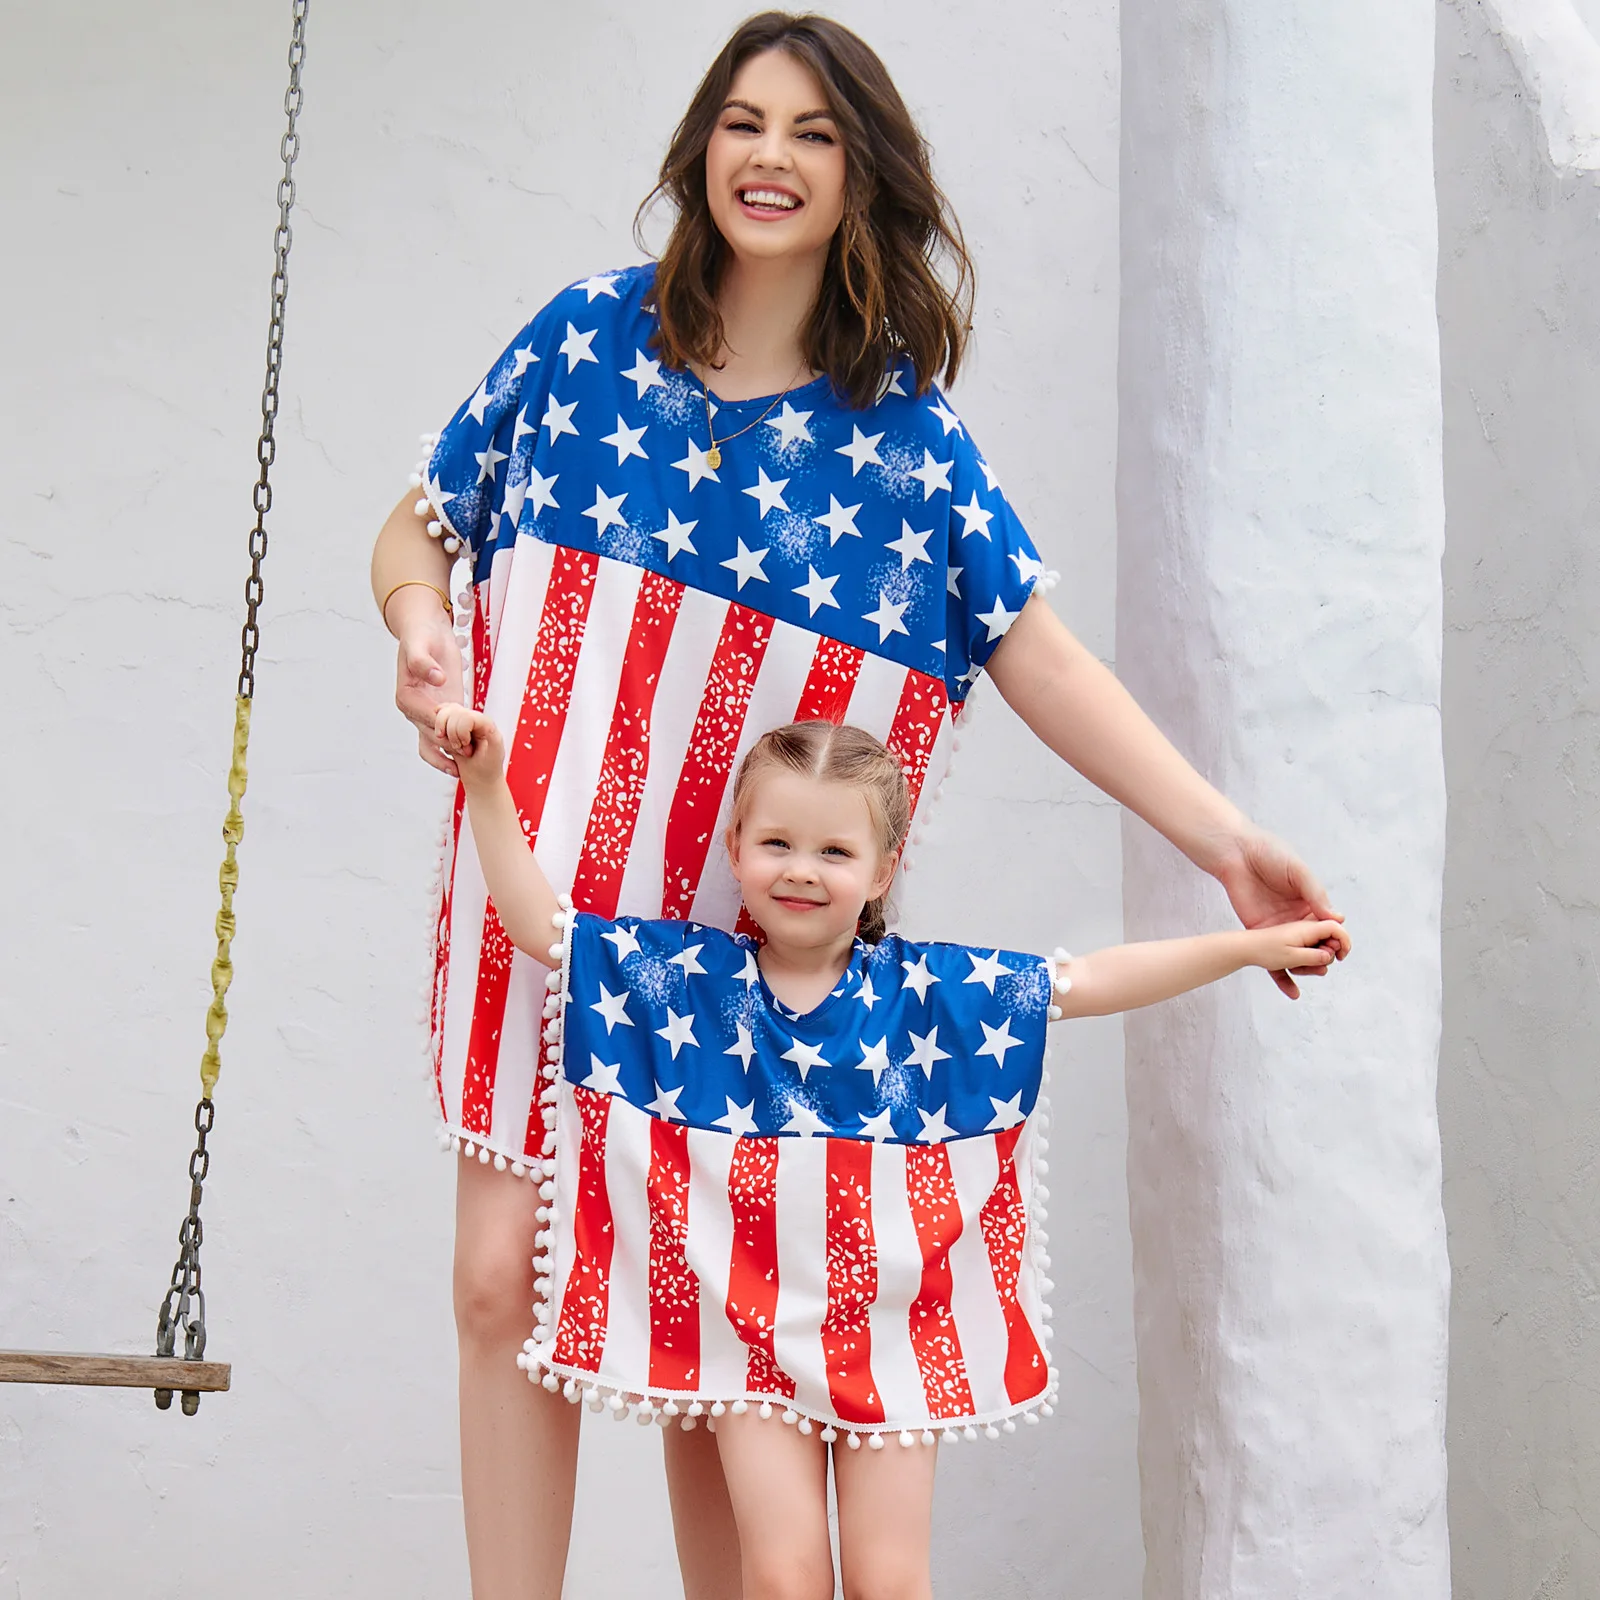 

Mommy and me Clothes Summer 4th of July Girl Outfits Mom and Daughter Tshirt Independance Day Costume Family Look Top